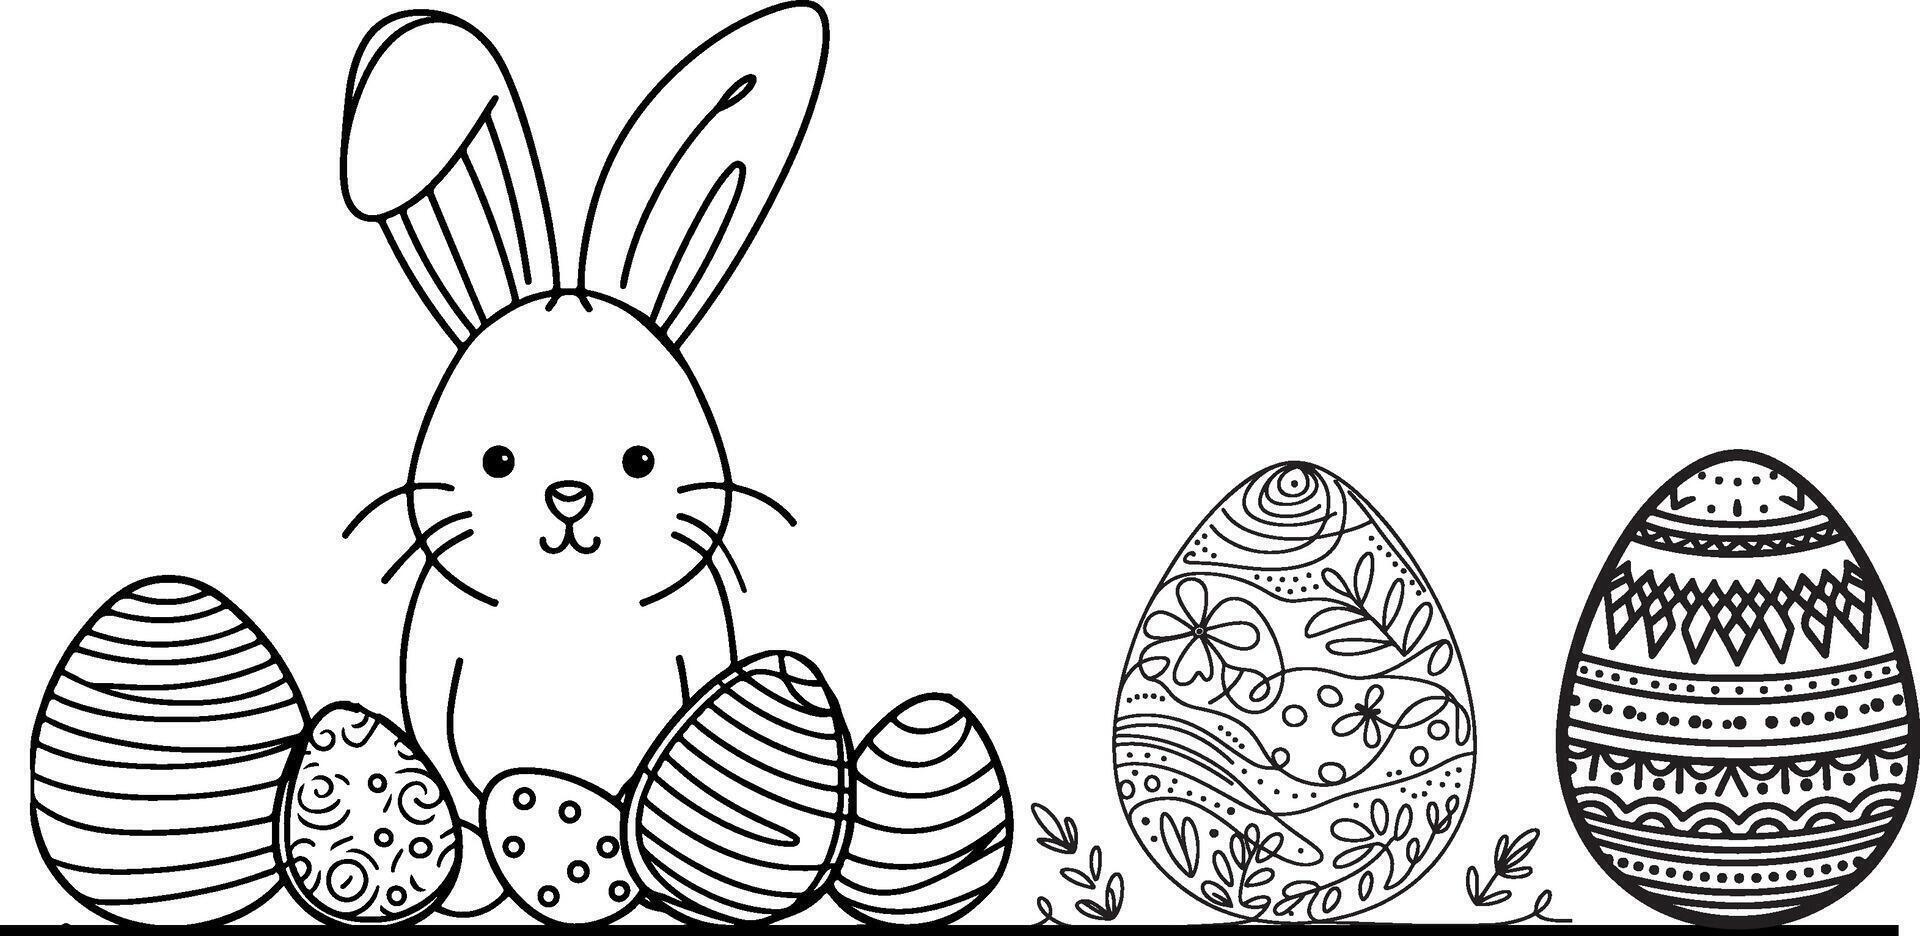 Hand drawn black line art rabbit easter egg doodle coloring linear style vector illustration elements. one continuous line drawing bunny with eggs Editable stroke outline